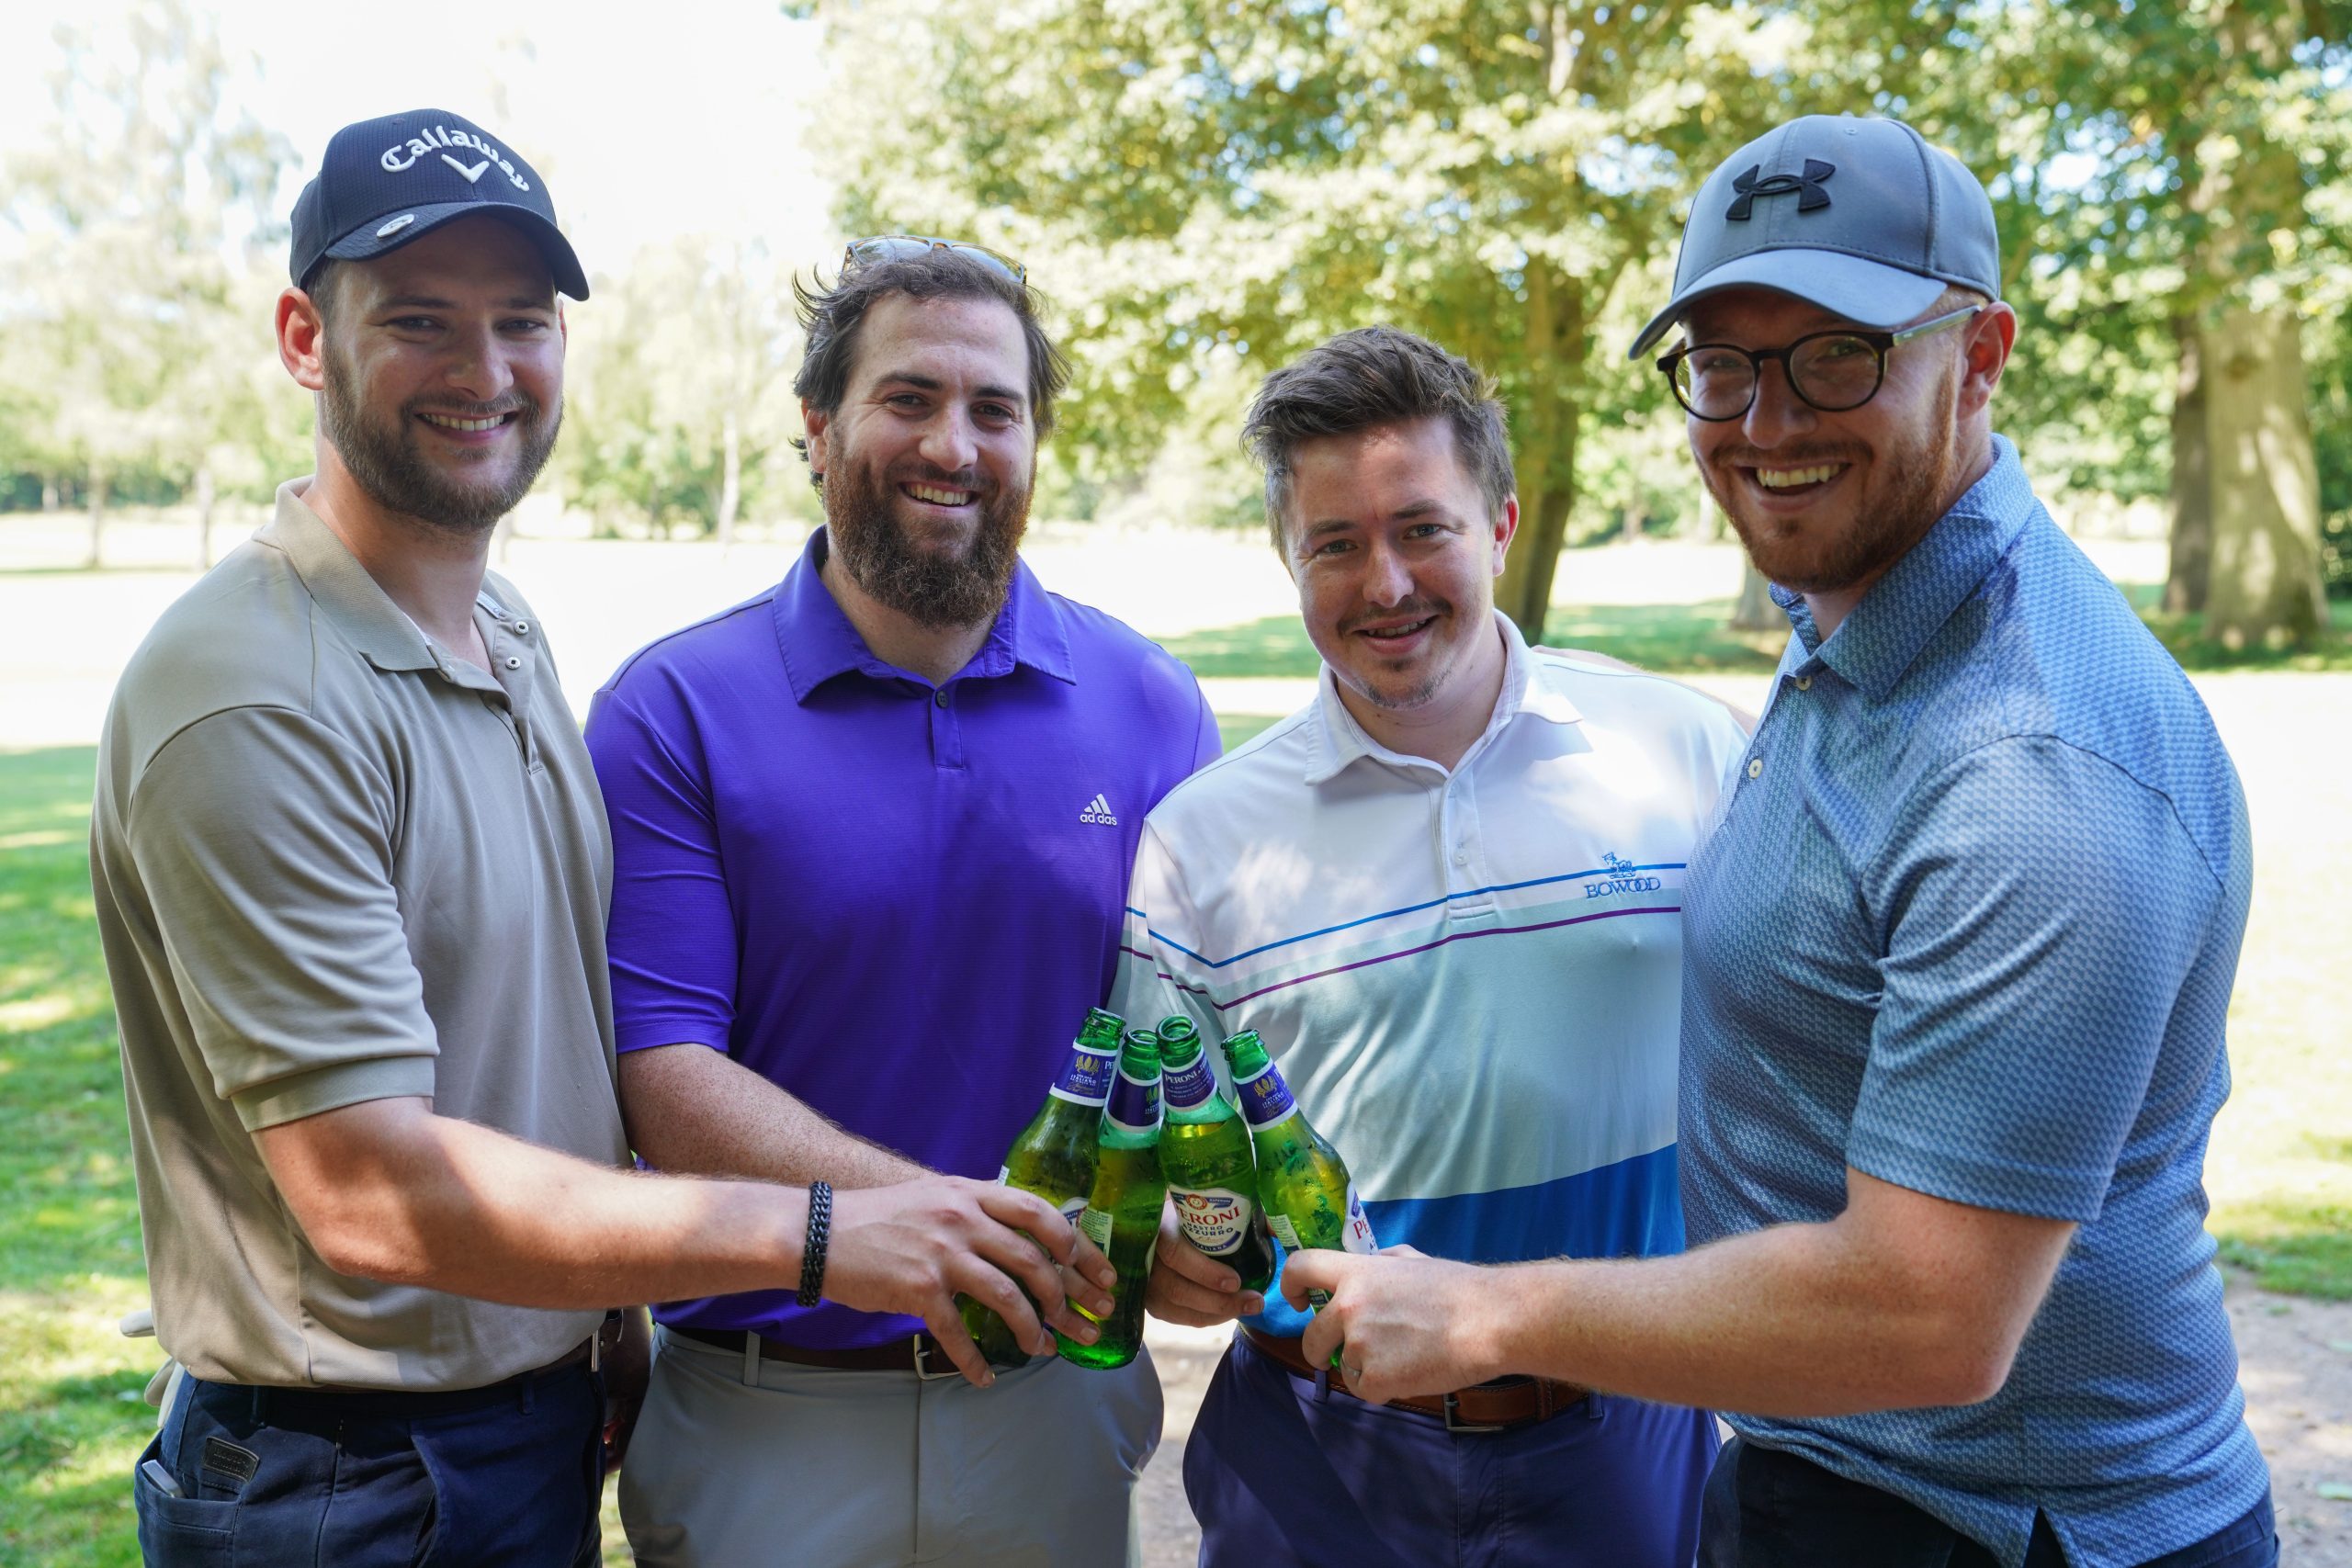 Image shows a group of men outside on a golf course they are all holding a bottled drink and clinking their bottles together. They are all smiling at the camera.